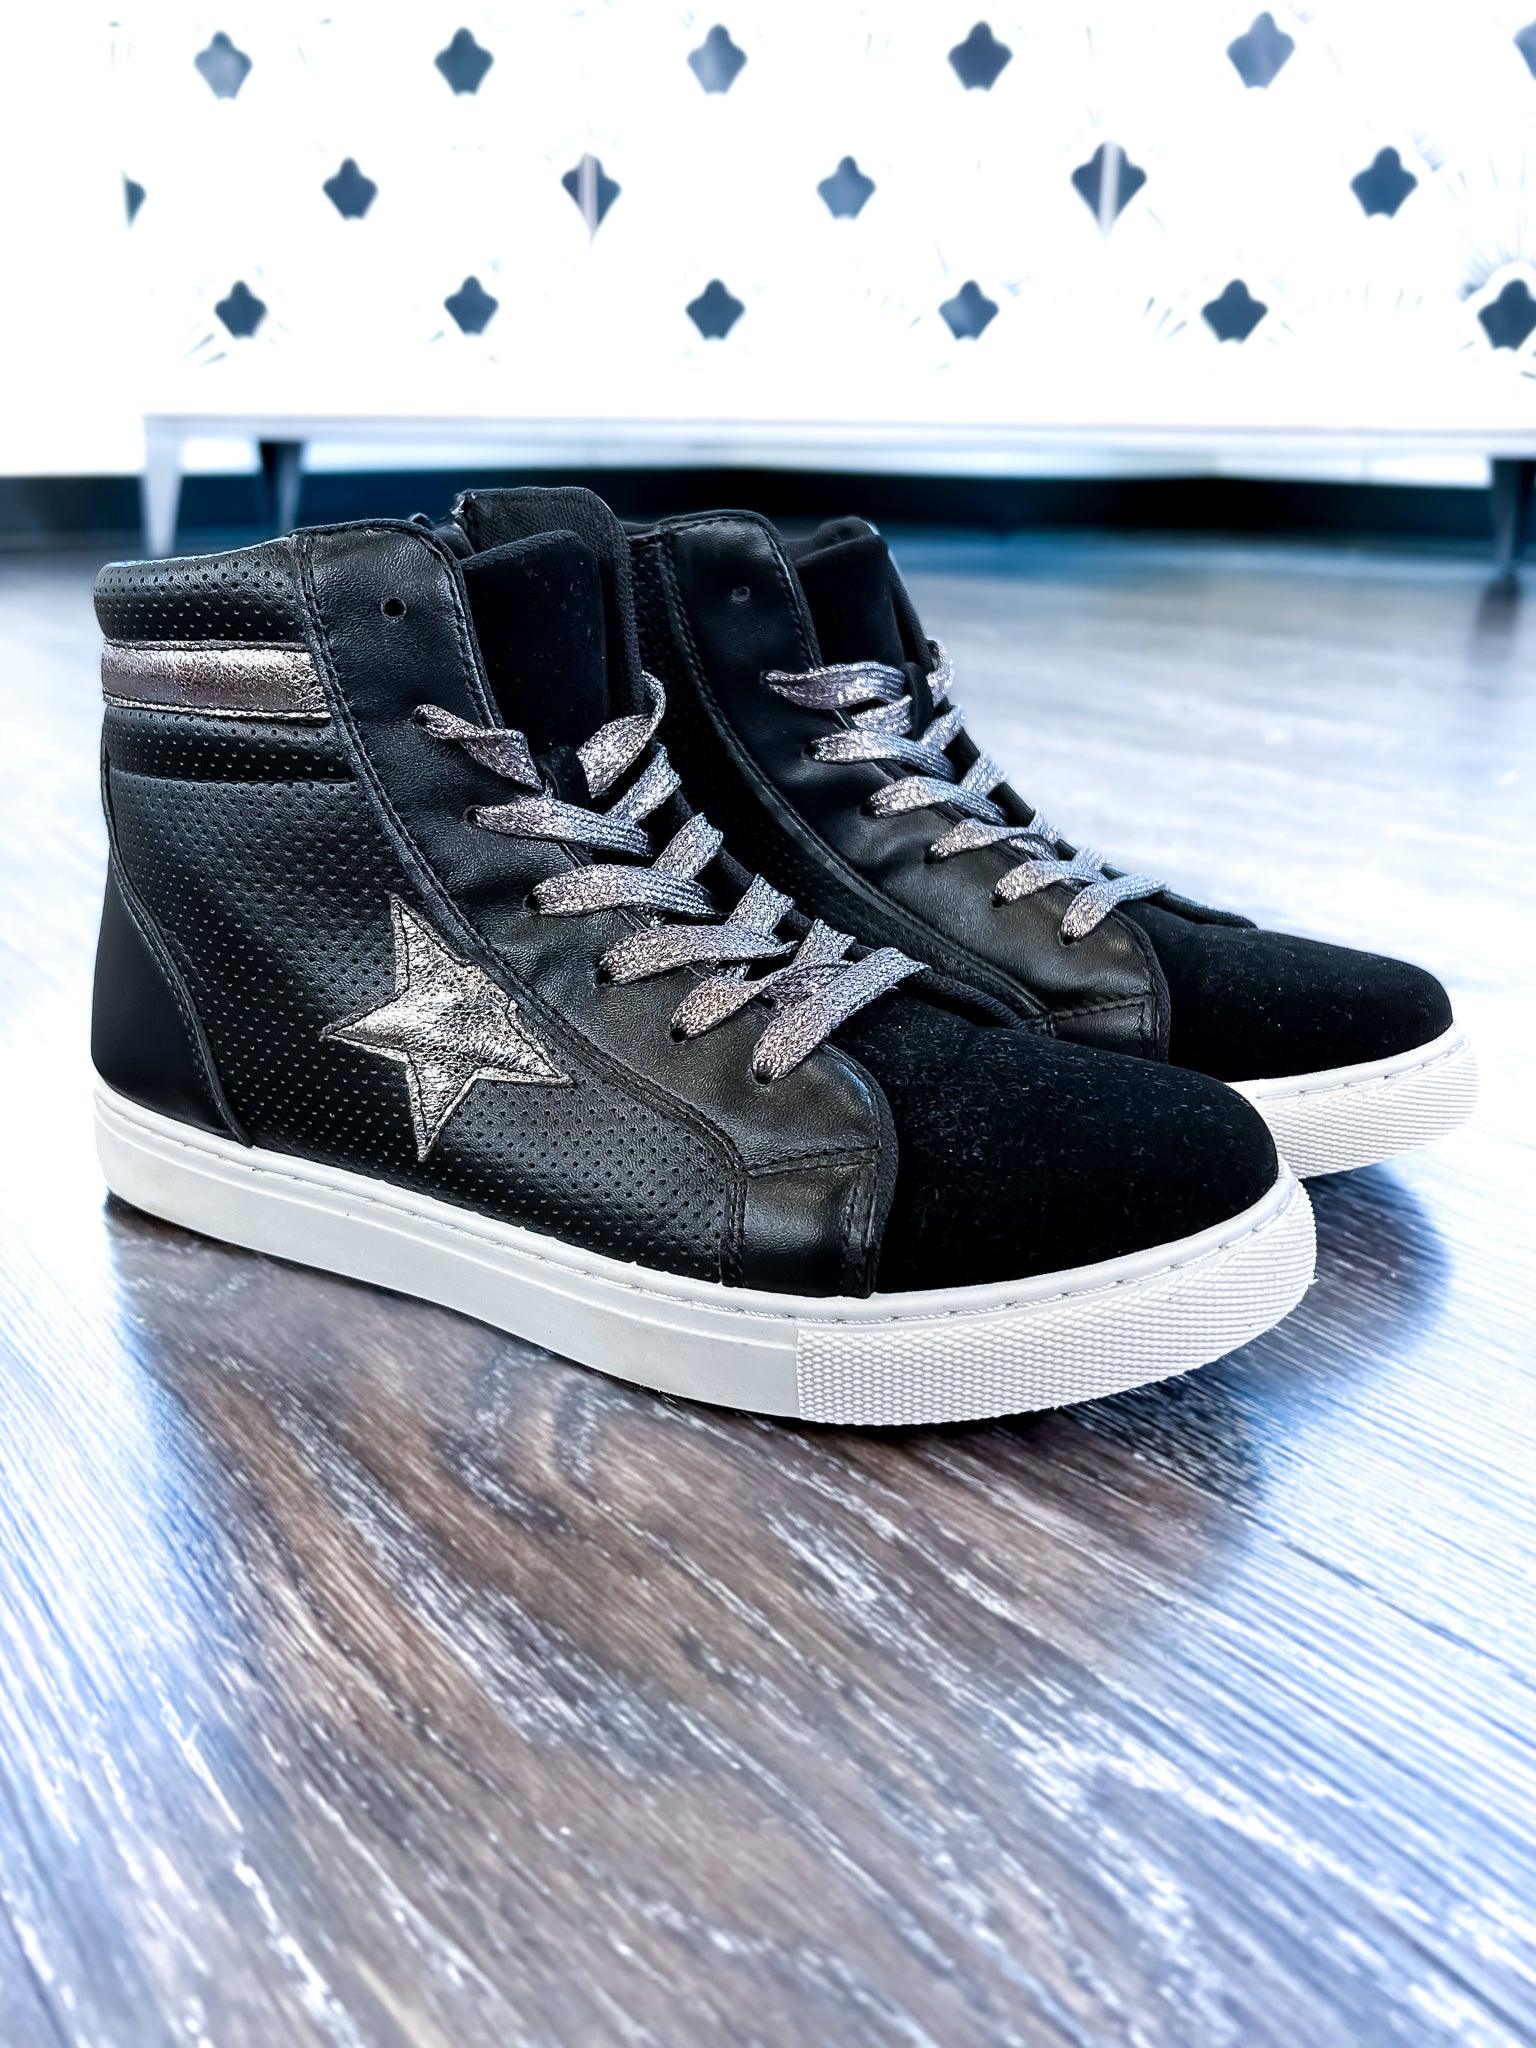 Fast Star High Top Sneakers - The ZigZag Stripe